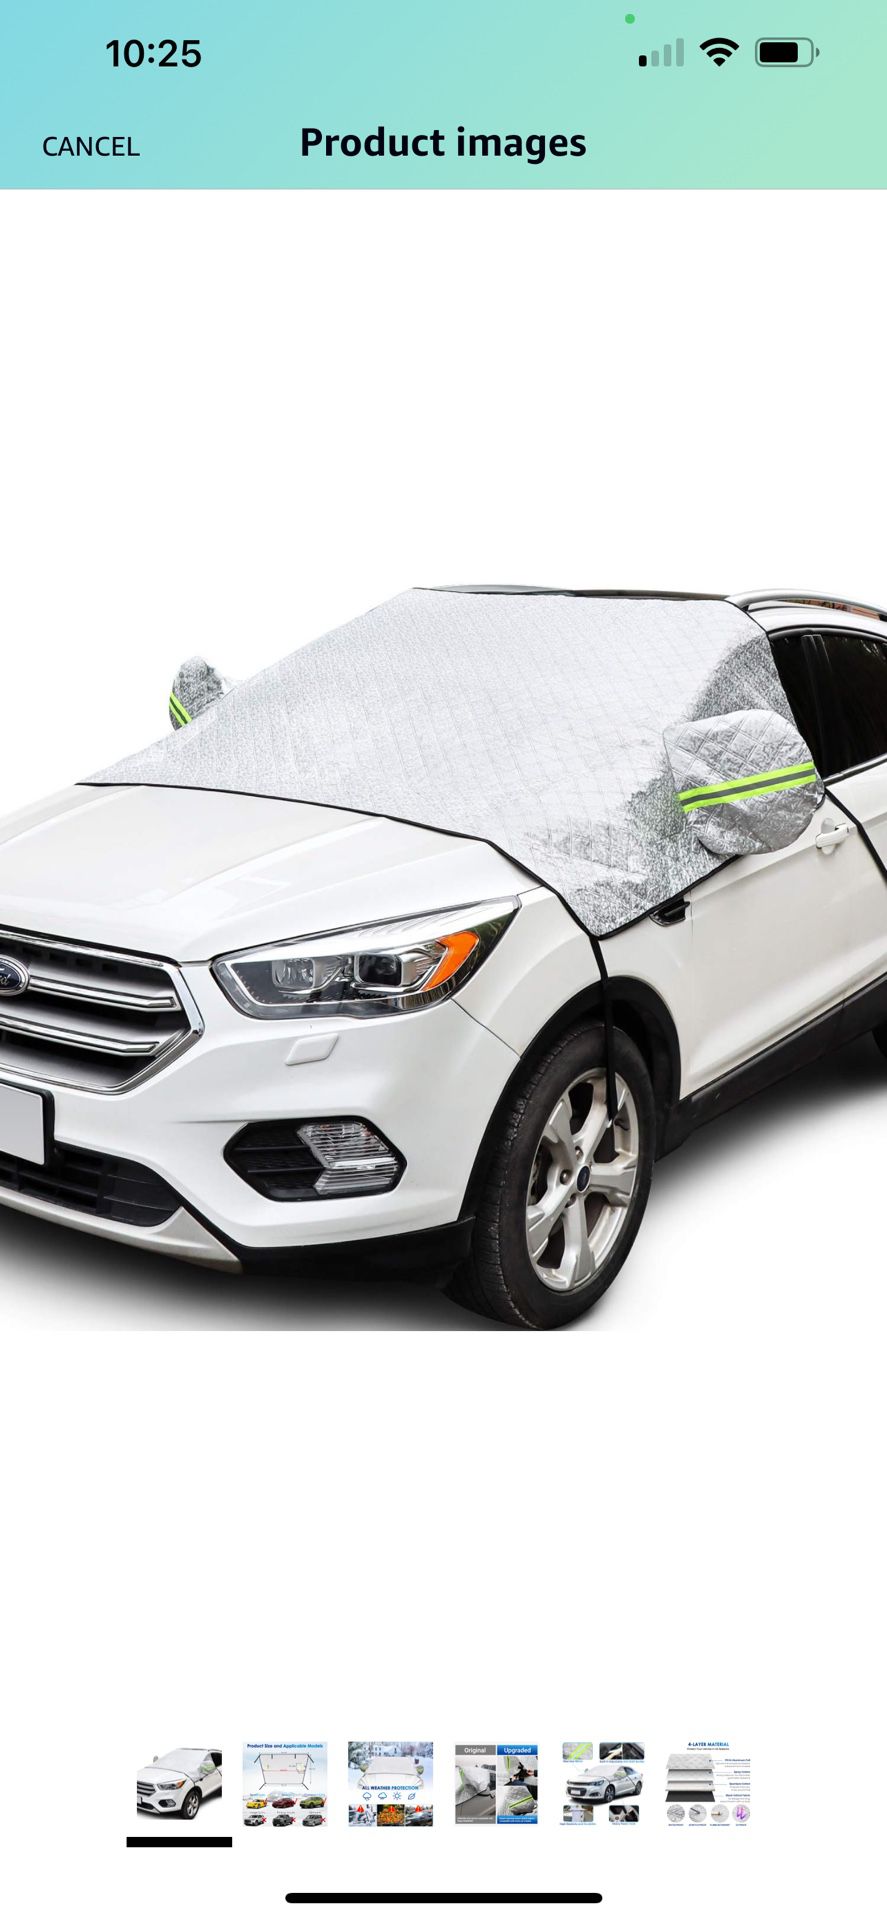 Windshield Cover for Ice and Snow, Car Windshield Snow Cover 4-Layer Protection for Snow, Ice, UV, Frost Wiper & Mirror Protector, Windproof S